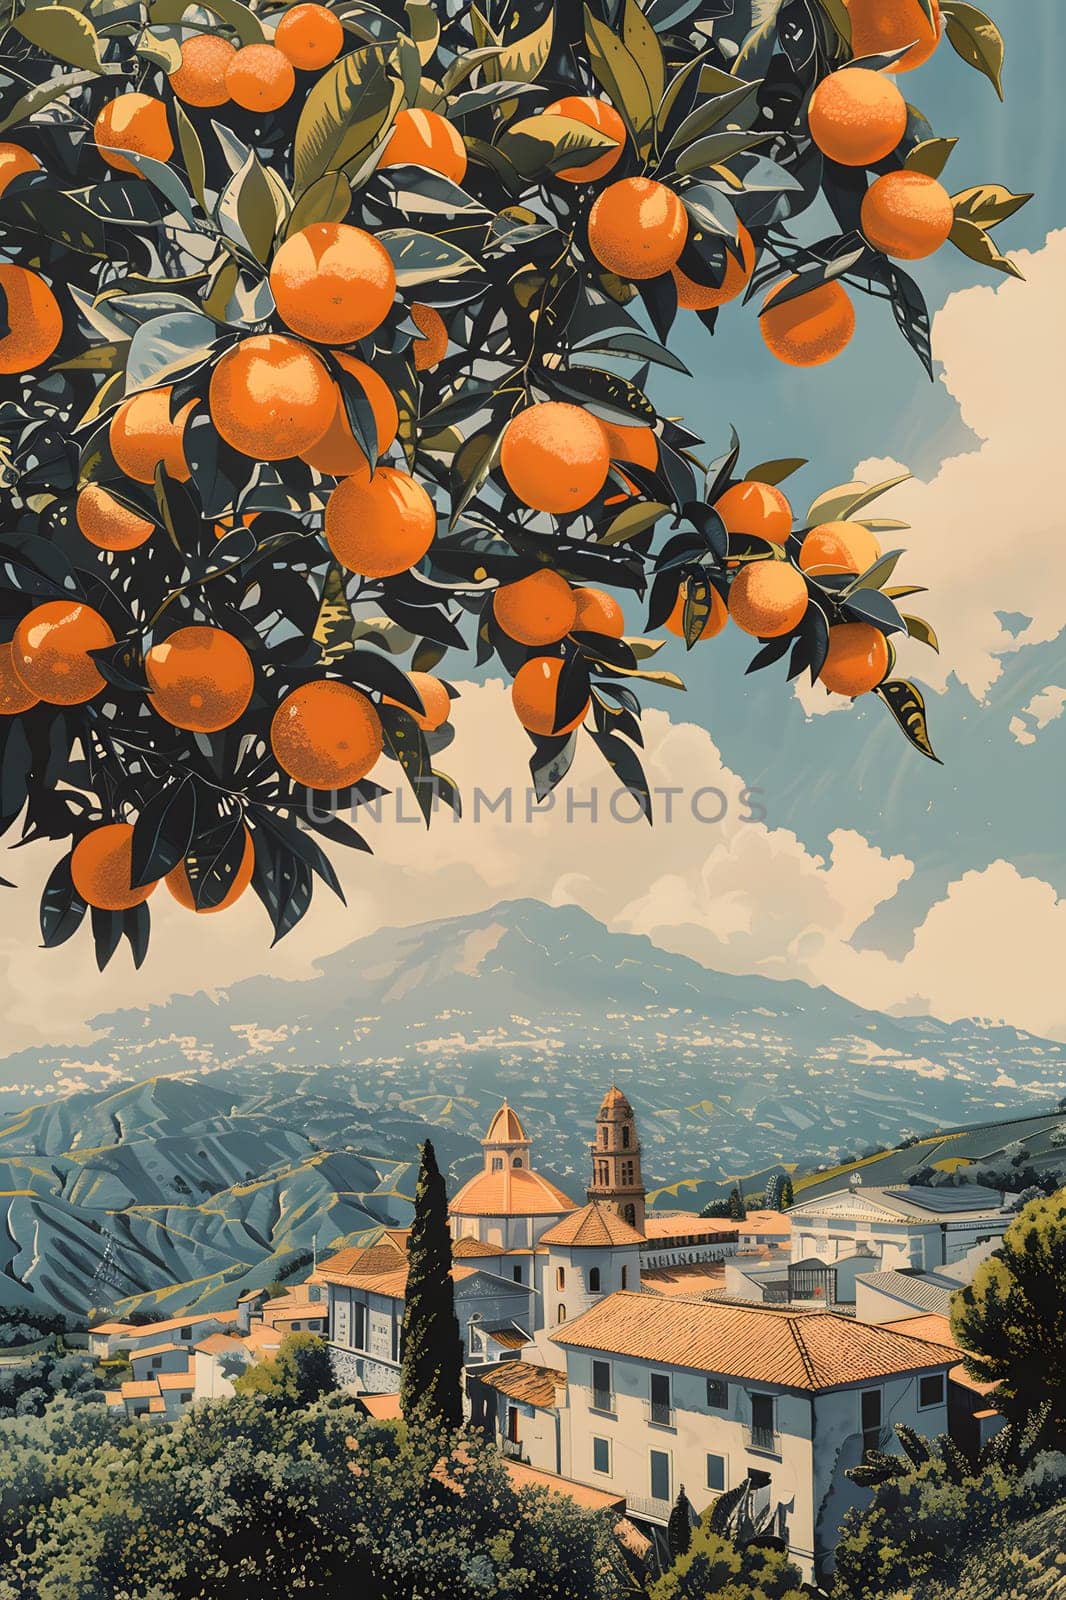 An art piece showcasing ripe oranges hanging from a Valencia orange tree, set against a backdrop of a village under a clear sky, highlighting the beauty of nature and food